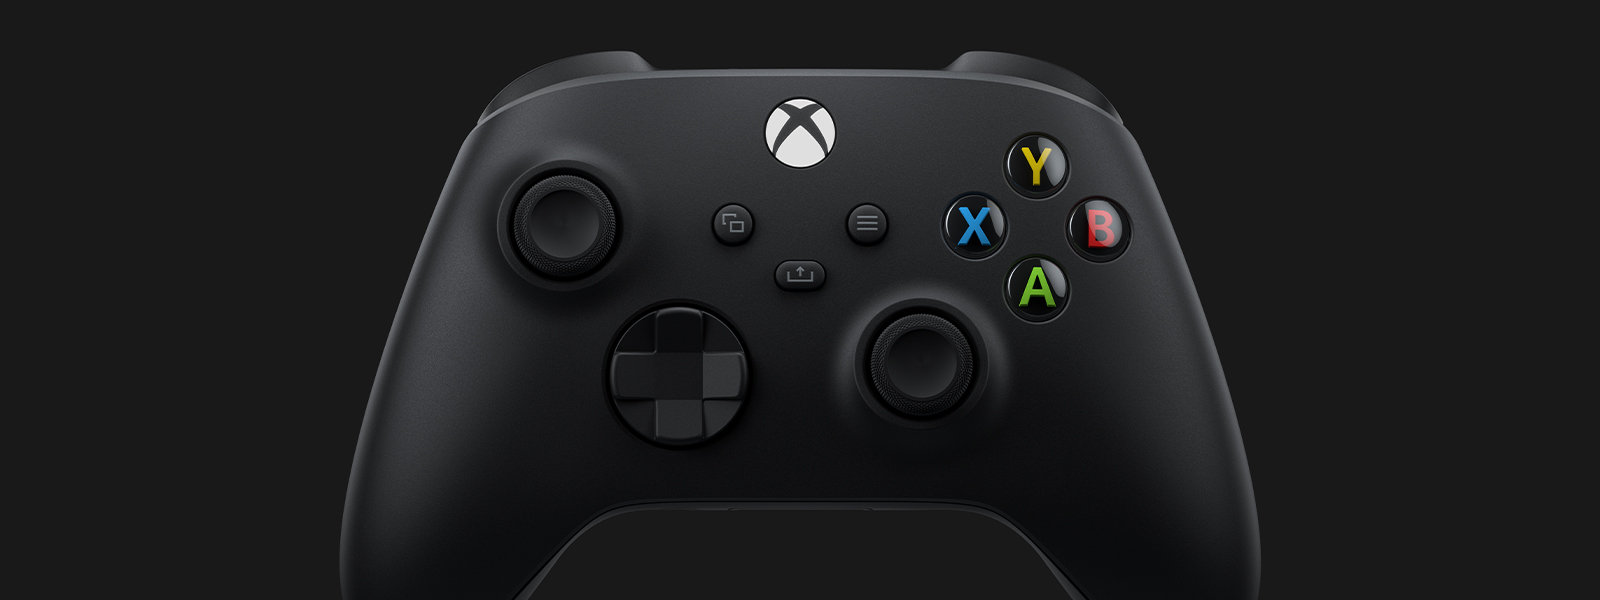 Close-up of buttons, triggers and D-pad on the Xbox Wireless Controller.